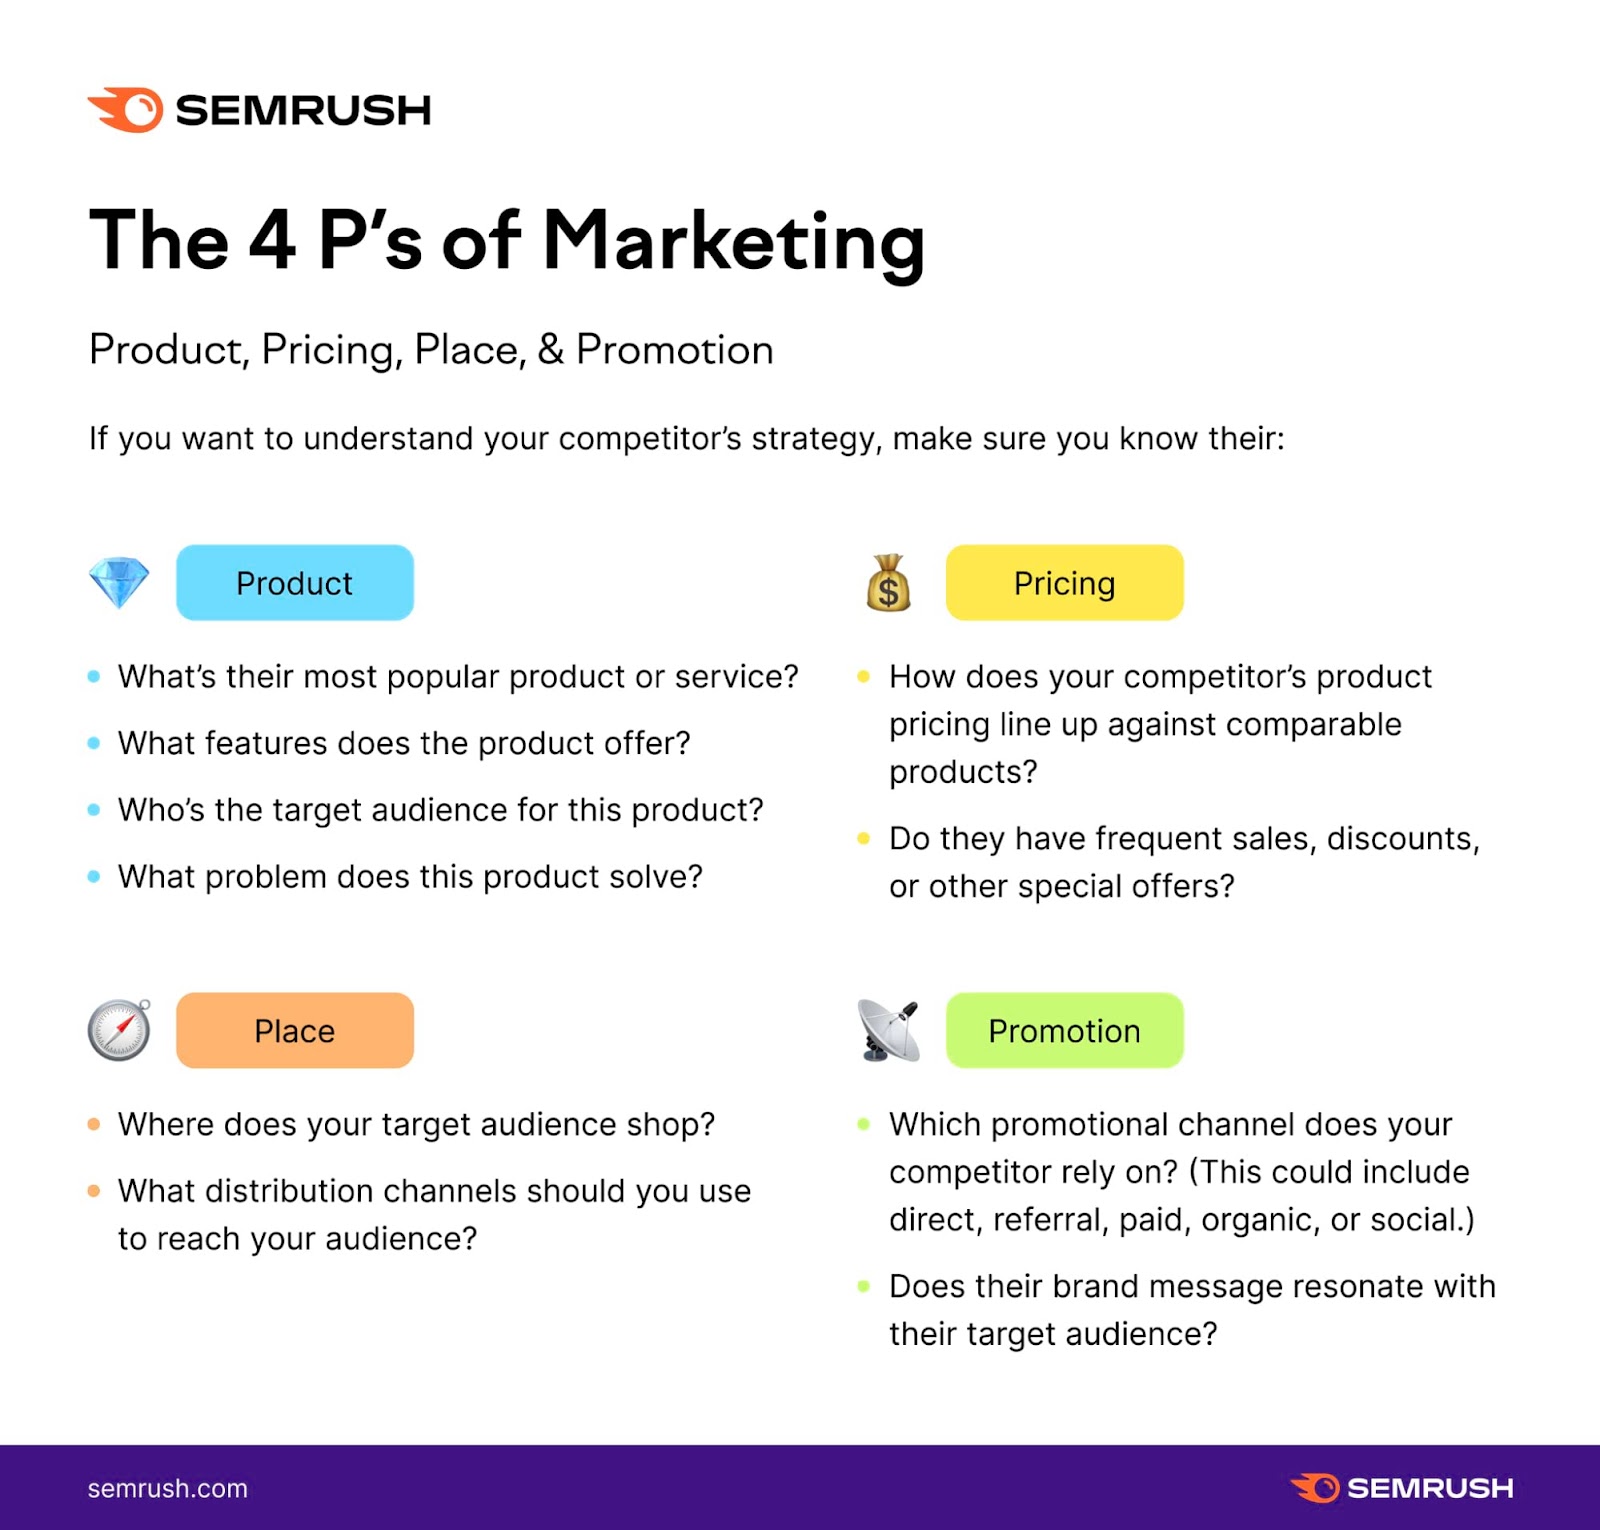 An infographic by Semrush explaining the four Ps of marketing: product, price, place, and promotion